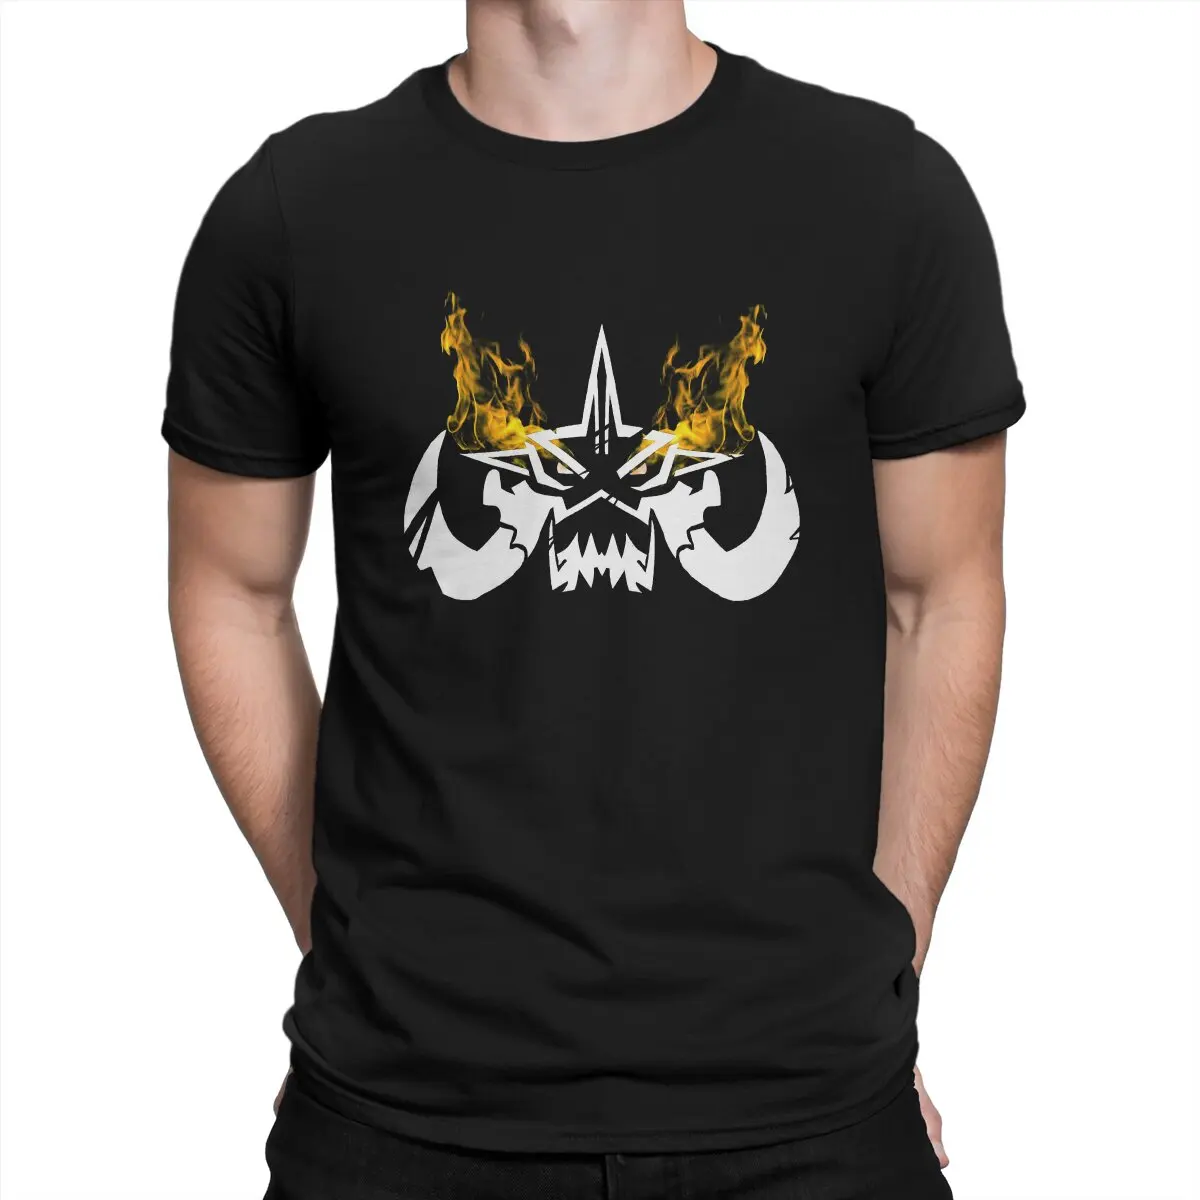 Brutal Legend Ormagoden T-Shirts for Men Diablo RPG Game Amazing Pure Cotton Tees Crewneck T Shirts Printing Clothing